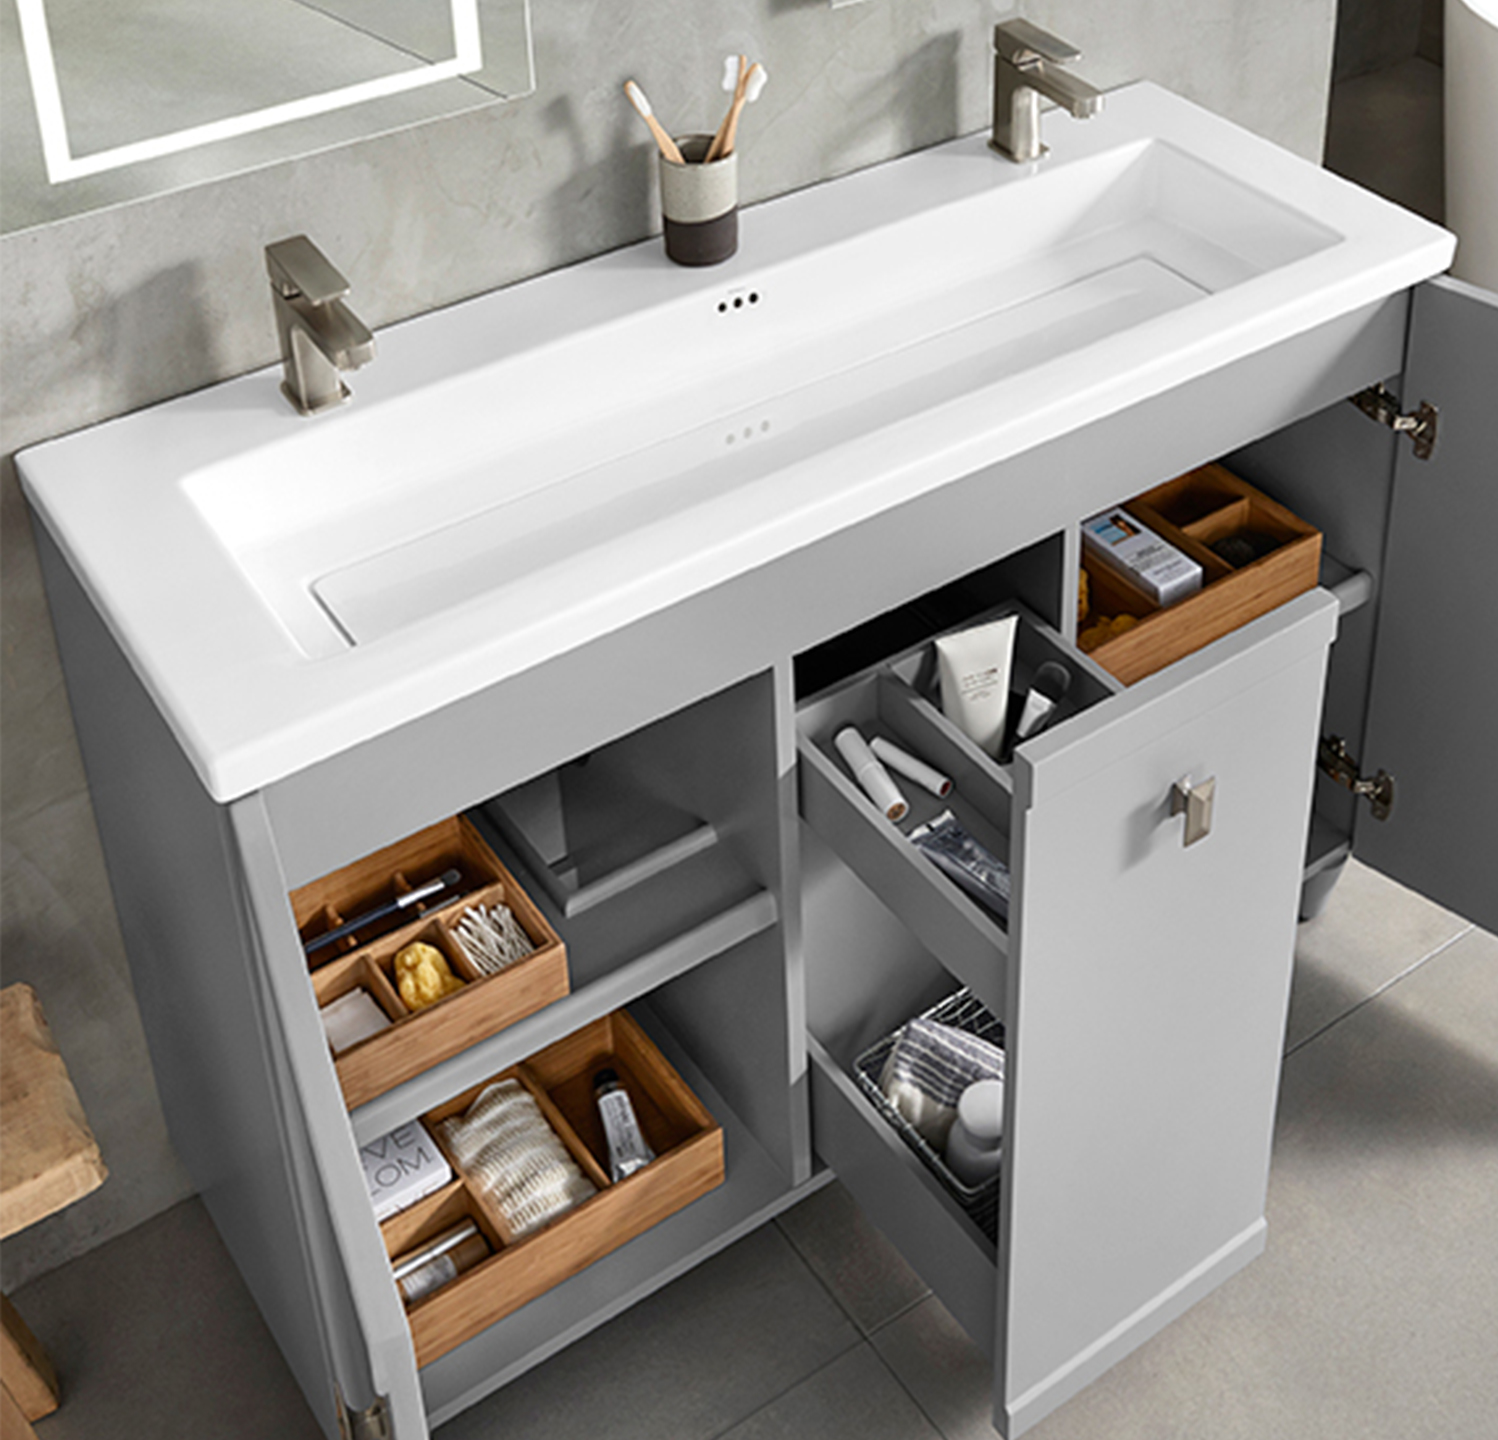 Ronbow launched Aravo Solutions a customizable vanity 